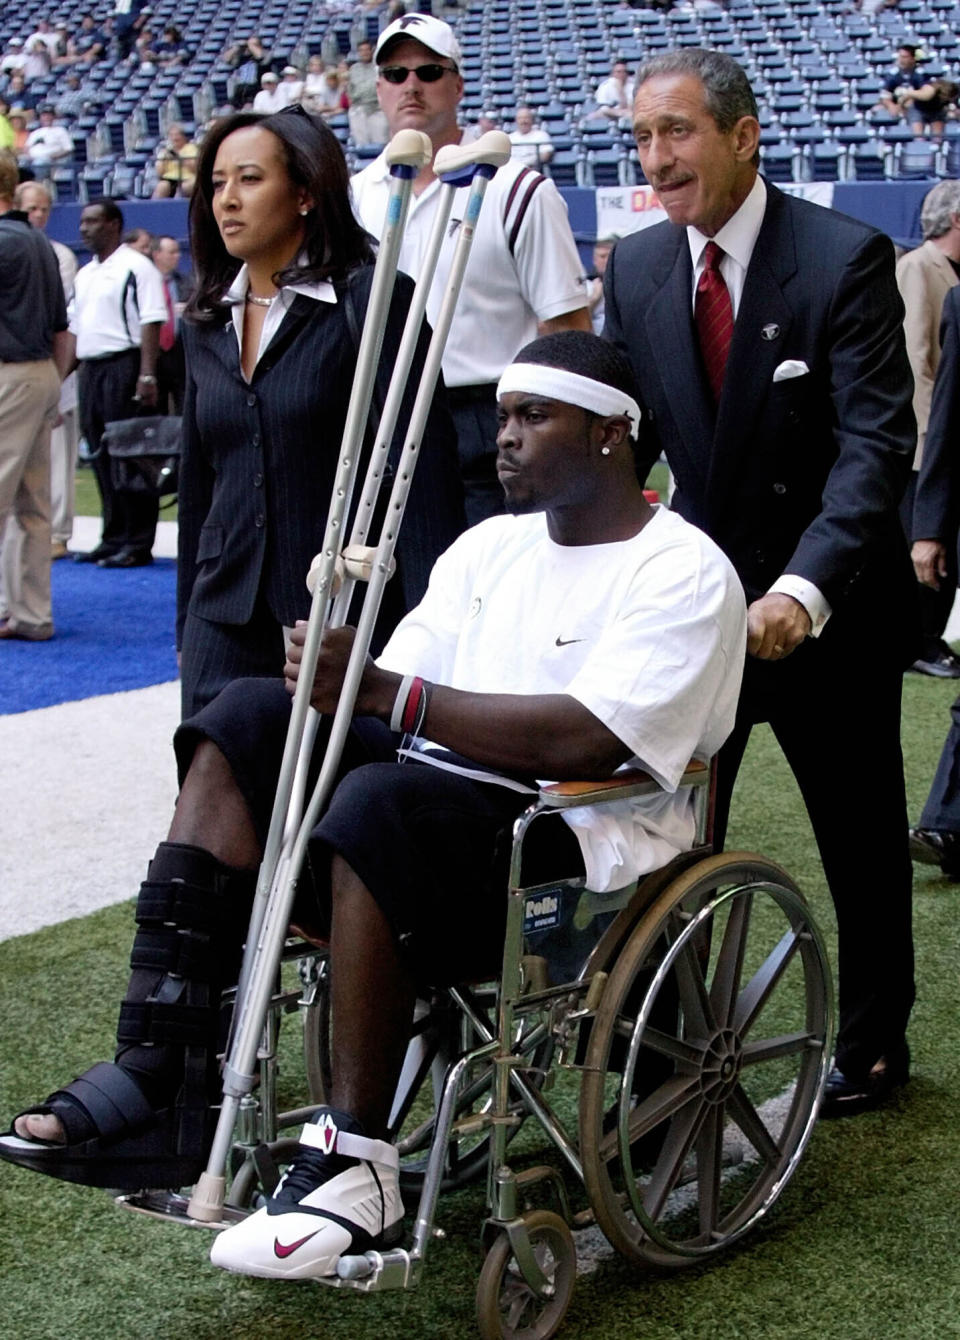 FILE - Atlanta Falcons quarterback Michael Vick is pushed by team owner Arthur Blank, right, as the team's vice president of communications and community affairs, Susan Bass, left, walks with them on the sideline before the team's NFL football game against the Dallas Cowboys in Irving, Texas, Sept. 7, 2003. The Falcons started 2-10 behind Doug Johnson and Kurt Kittner before Vick returned. (AP Photo/Donna McWilliam, File)